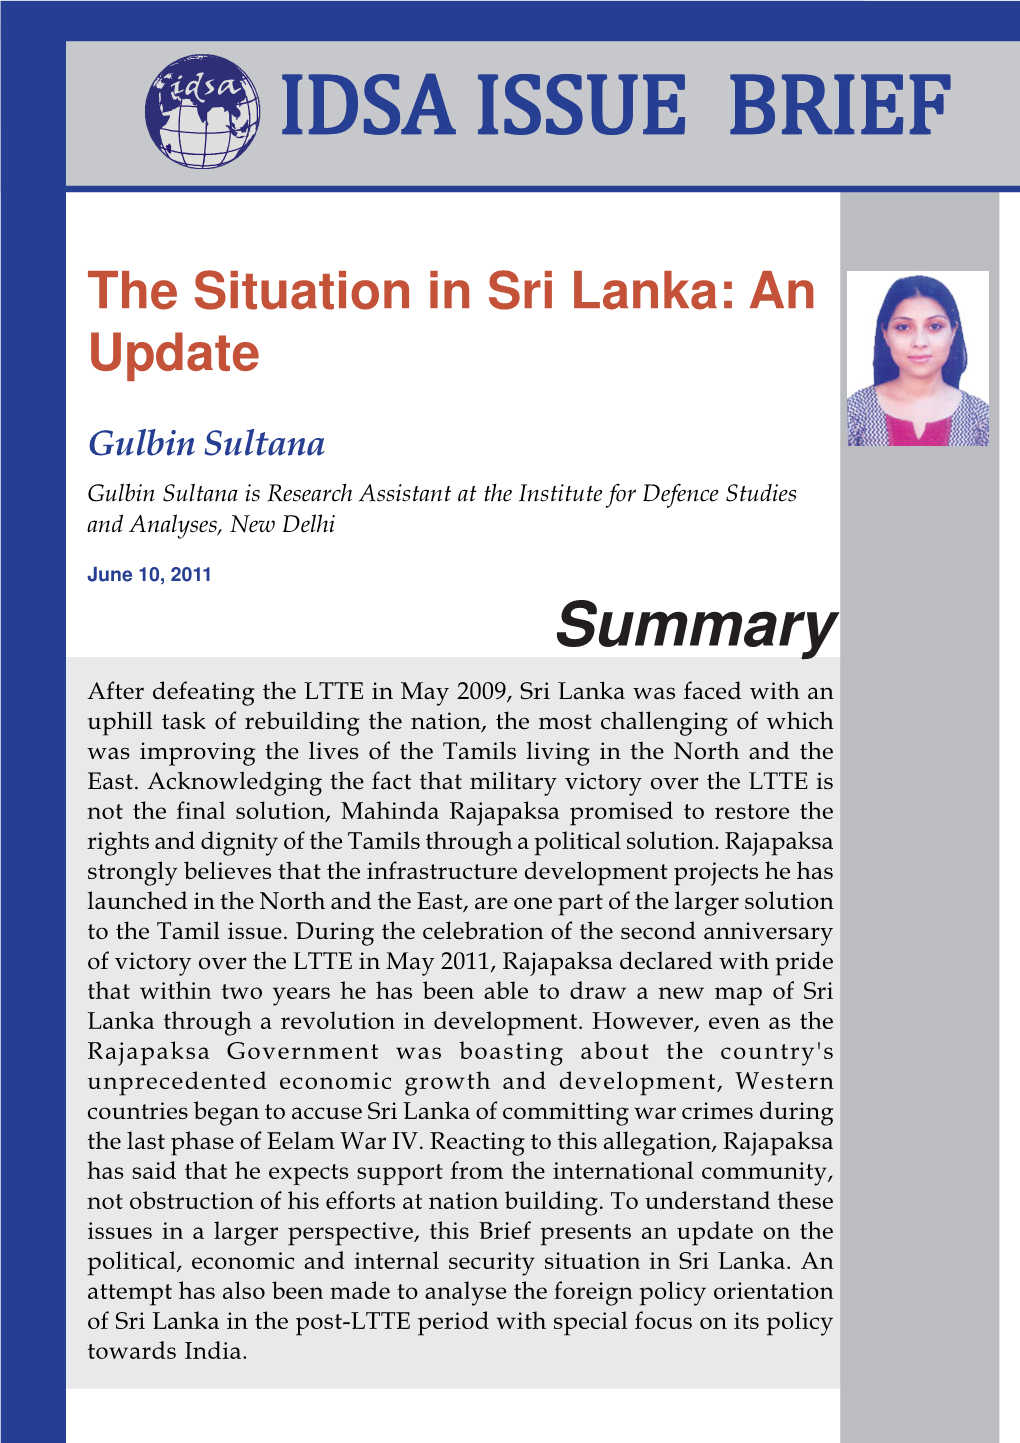 The Situation in Sri Lanka: an Update